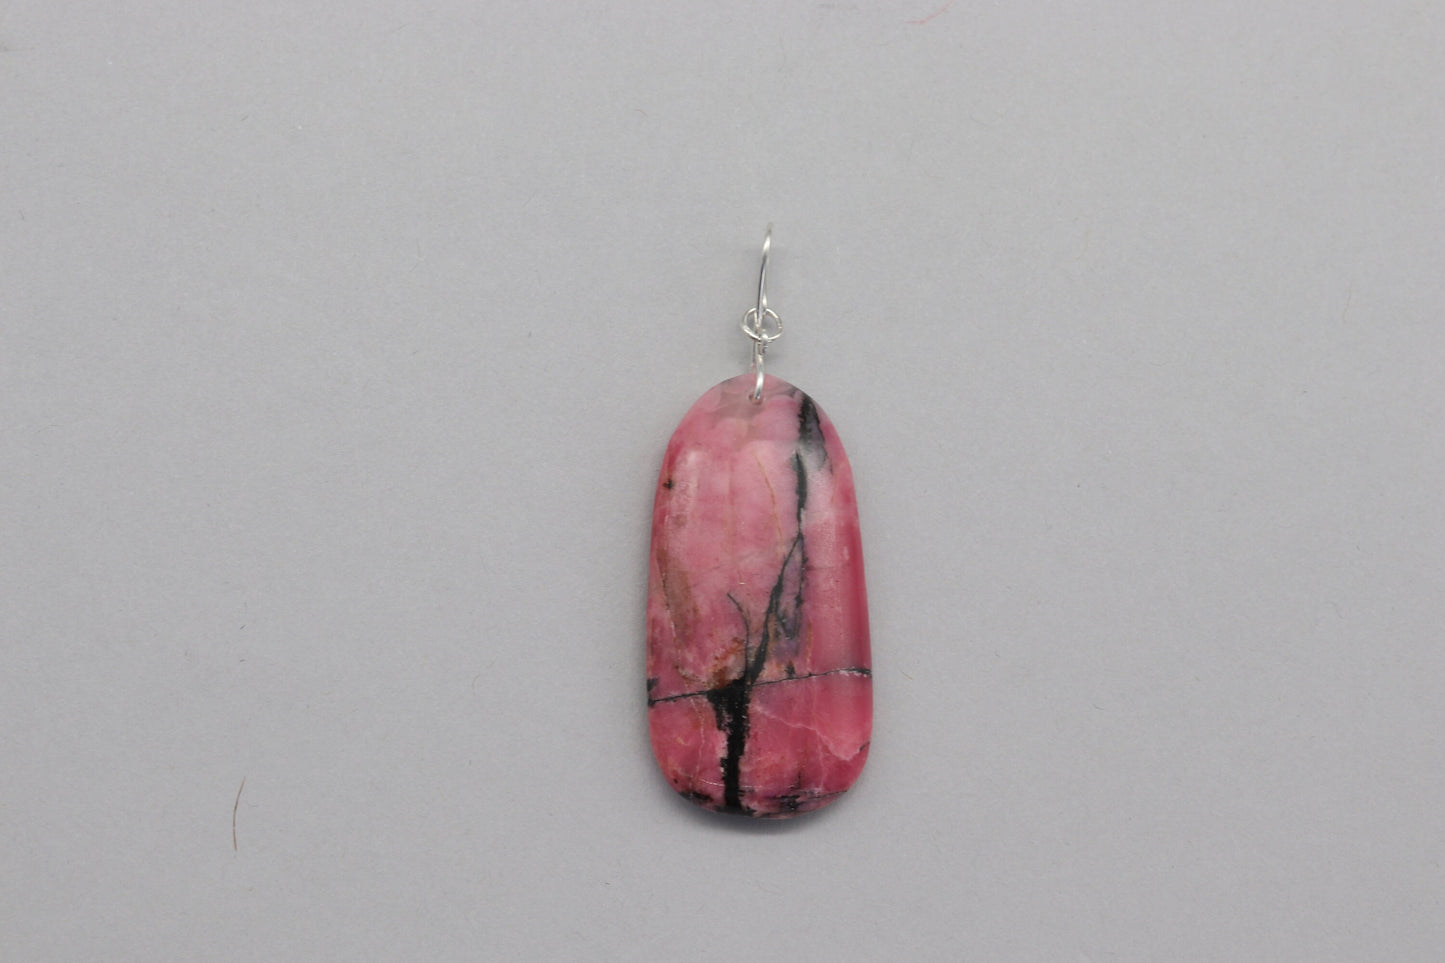 Rhodonite Crystal Pendant, Handcut and Polished in USA with infinity bow silver bail, USA made